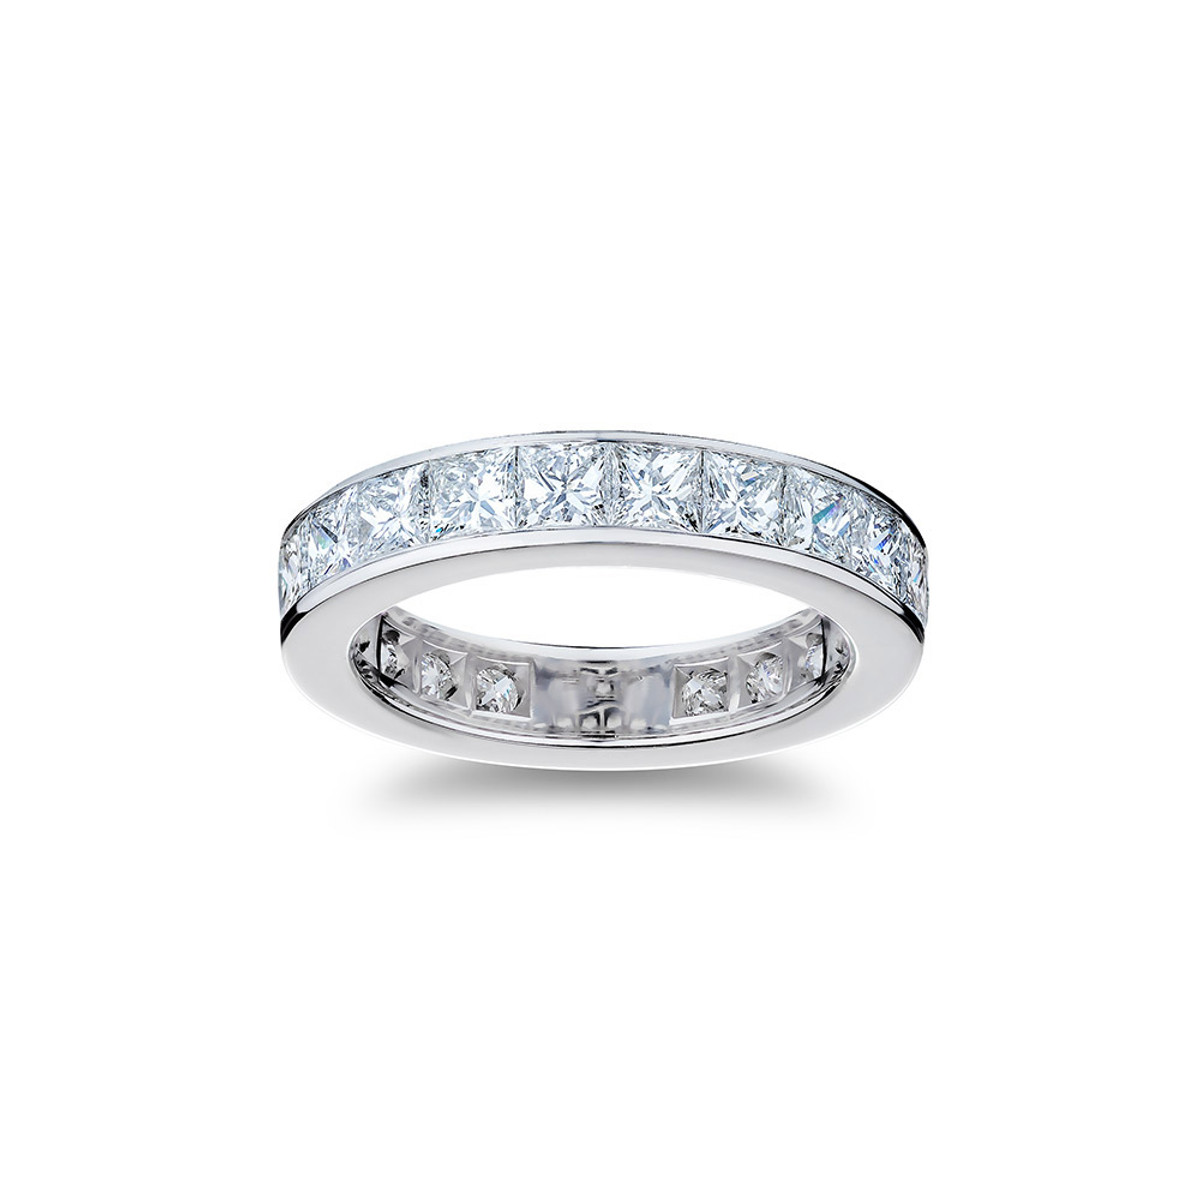 Hyde Park Collection Platinum Diamond Band-43573 Product Image